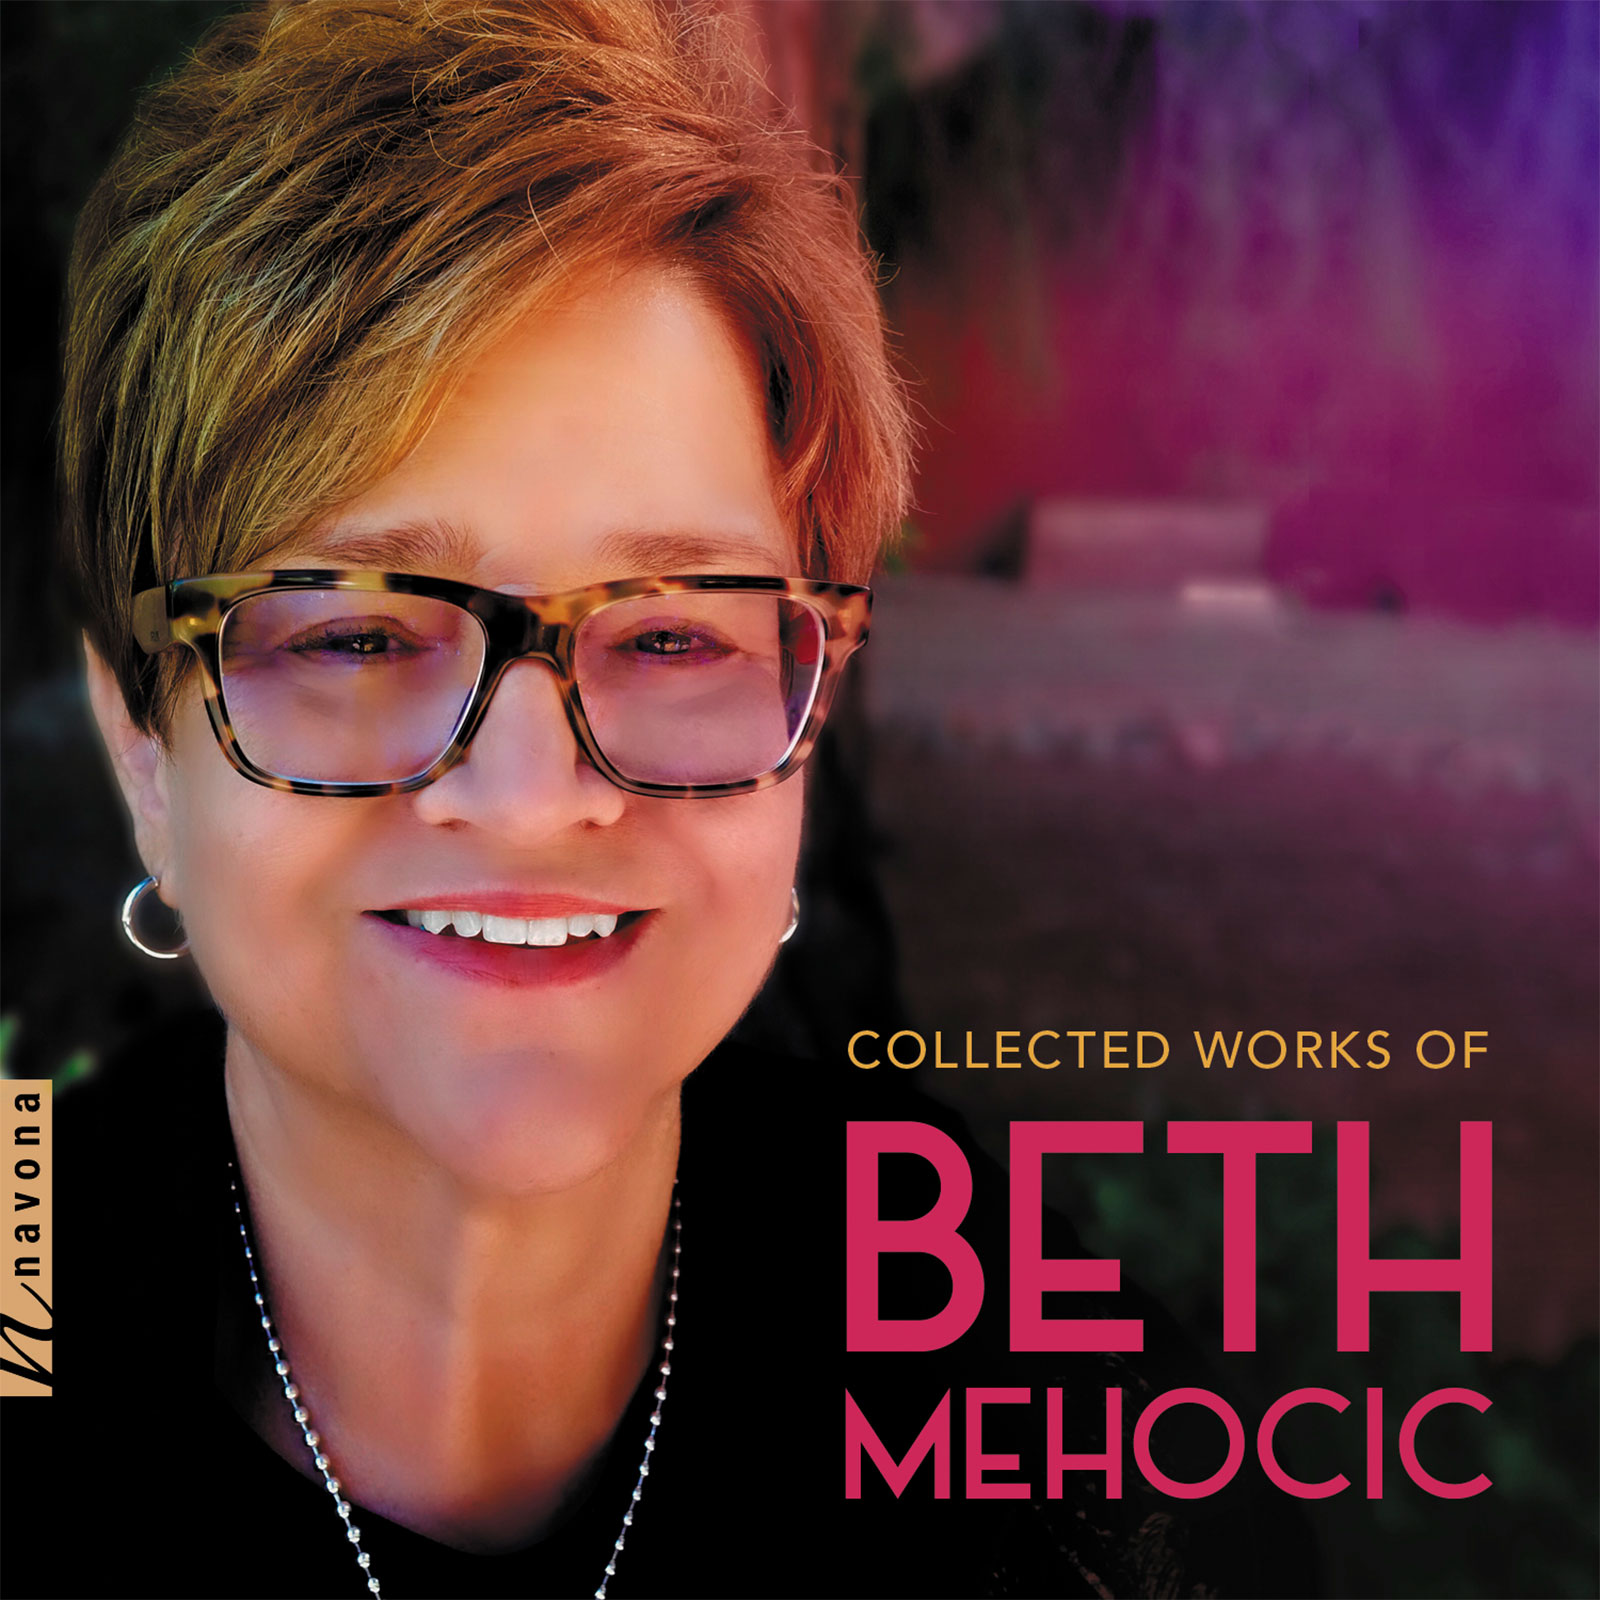 COLLECTED WORKS OF BETH MEHOCIC - Album Cover